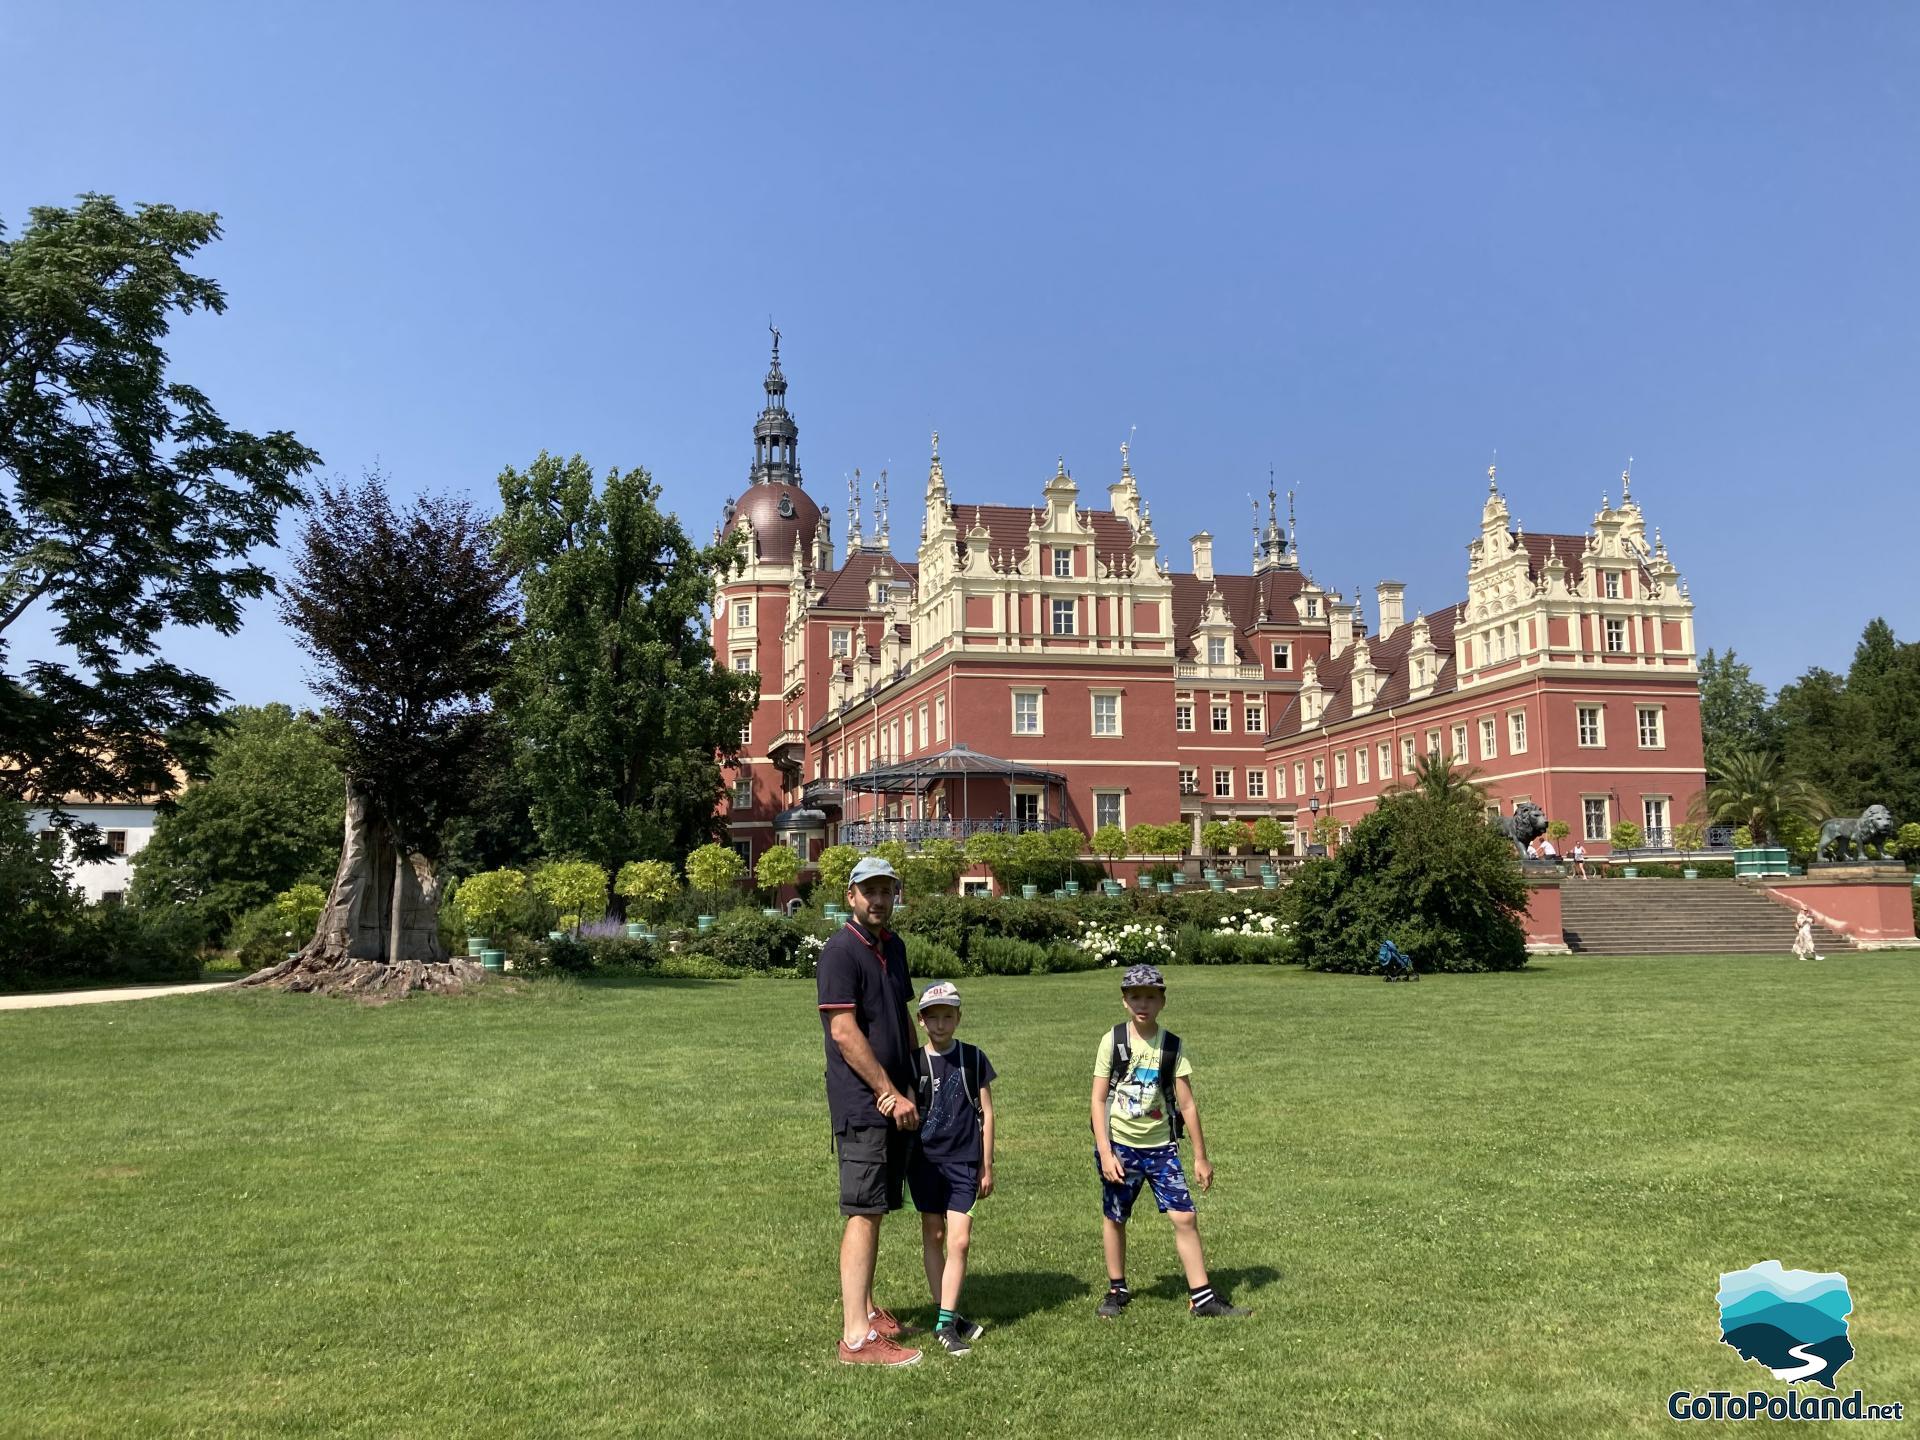 a red castle, a man and two boys are in front of it